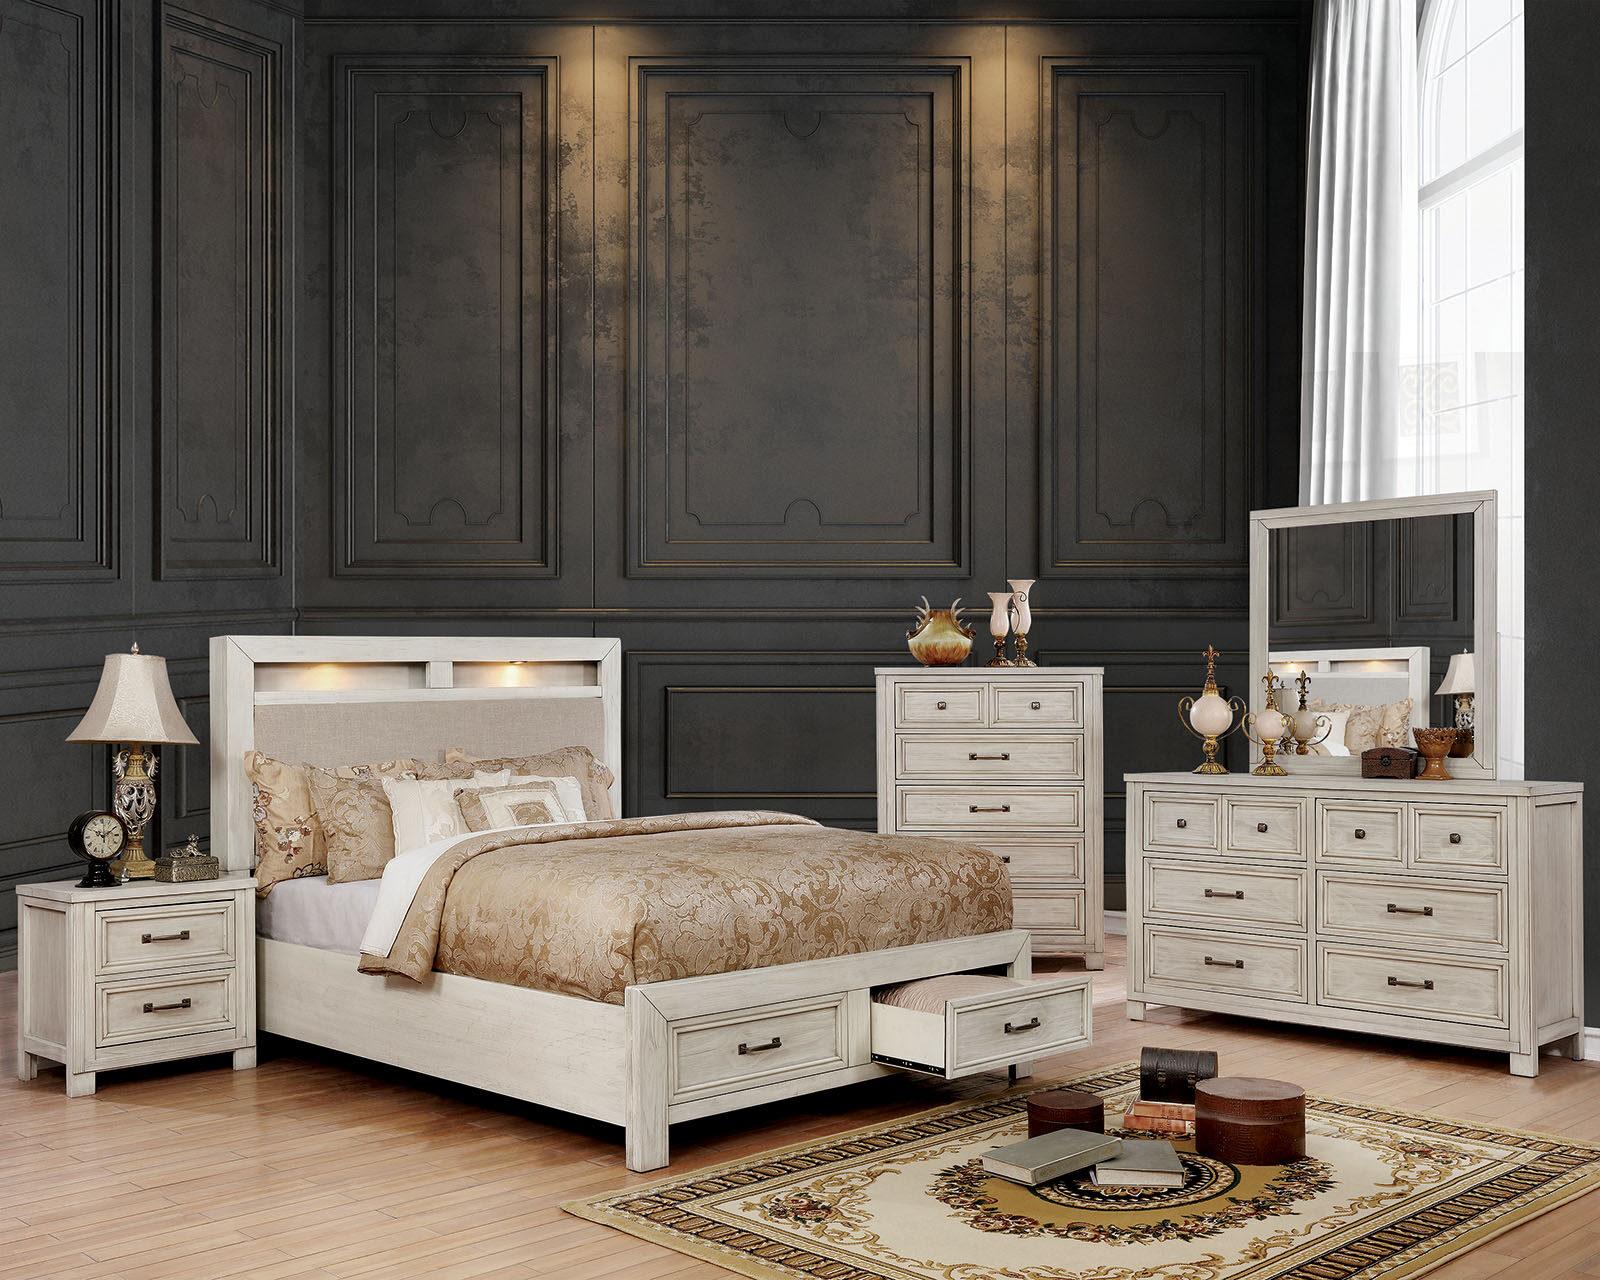 Transitional Storage Bedroom Set CM7365WH-CK-6PC Tywyn CM7365WH-CK-6PC in Antique White Fabric